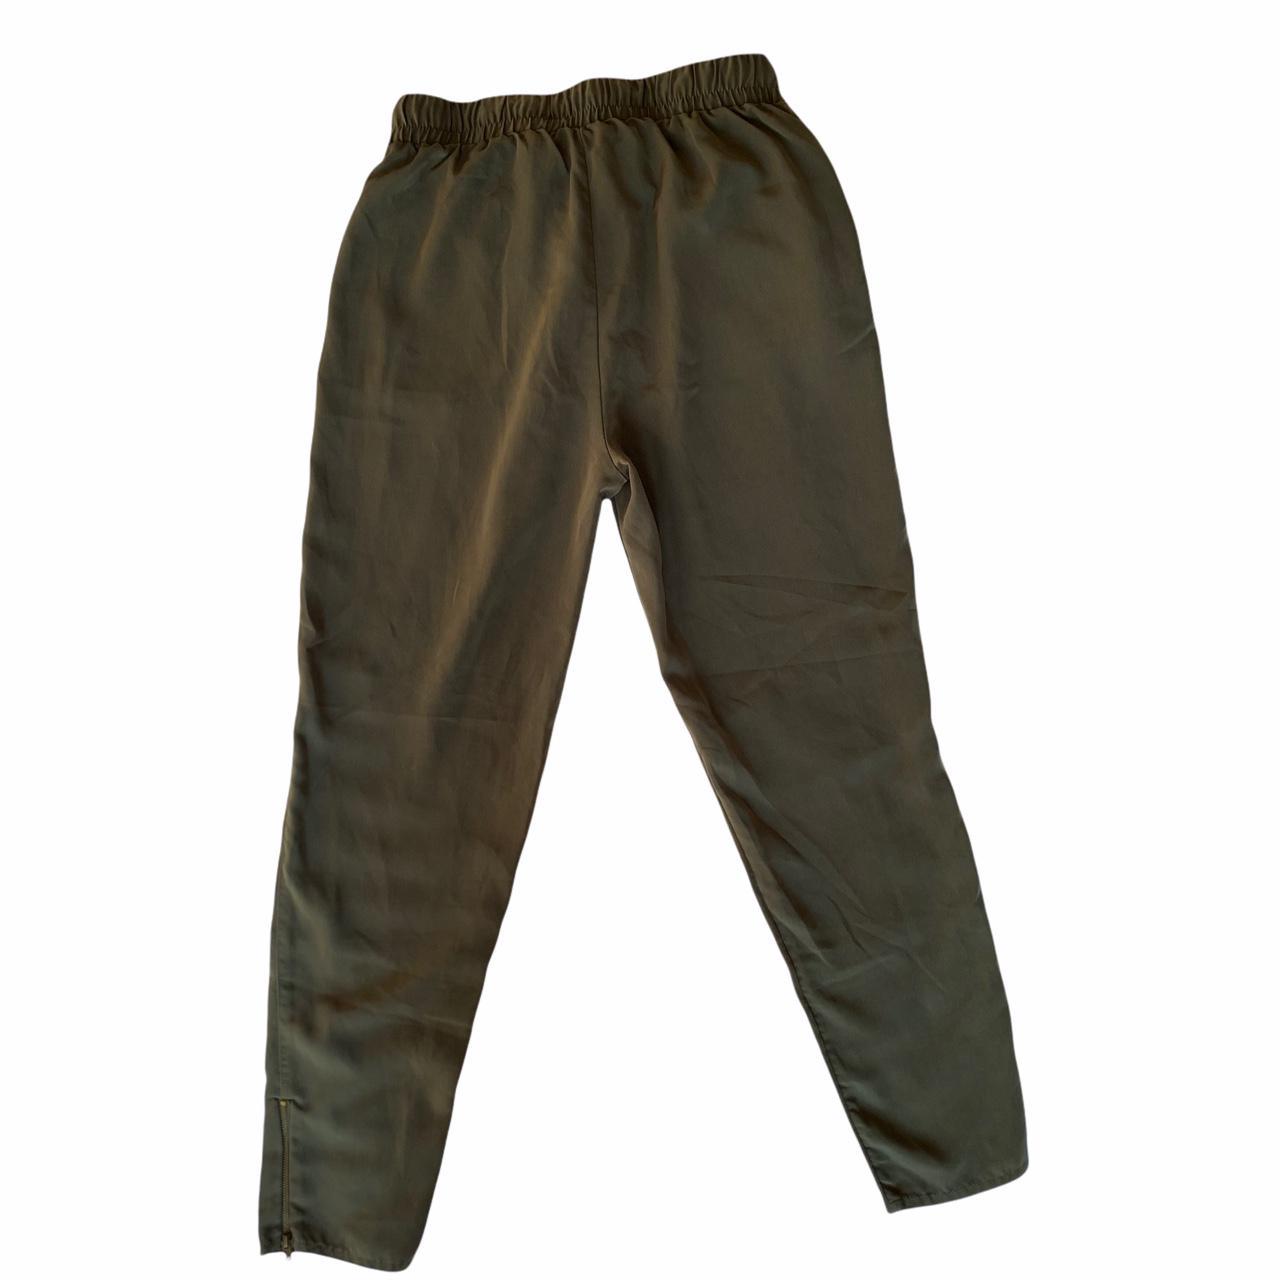 unbranded silky smooth forest green pants with ankle... - Depop